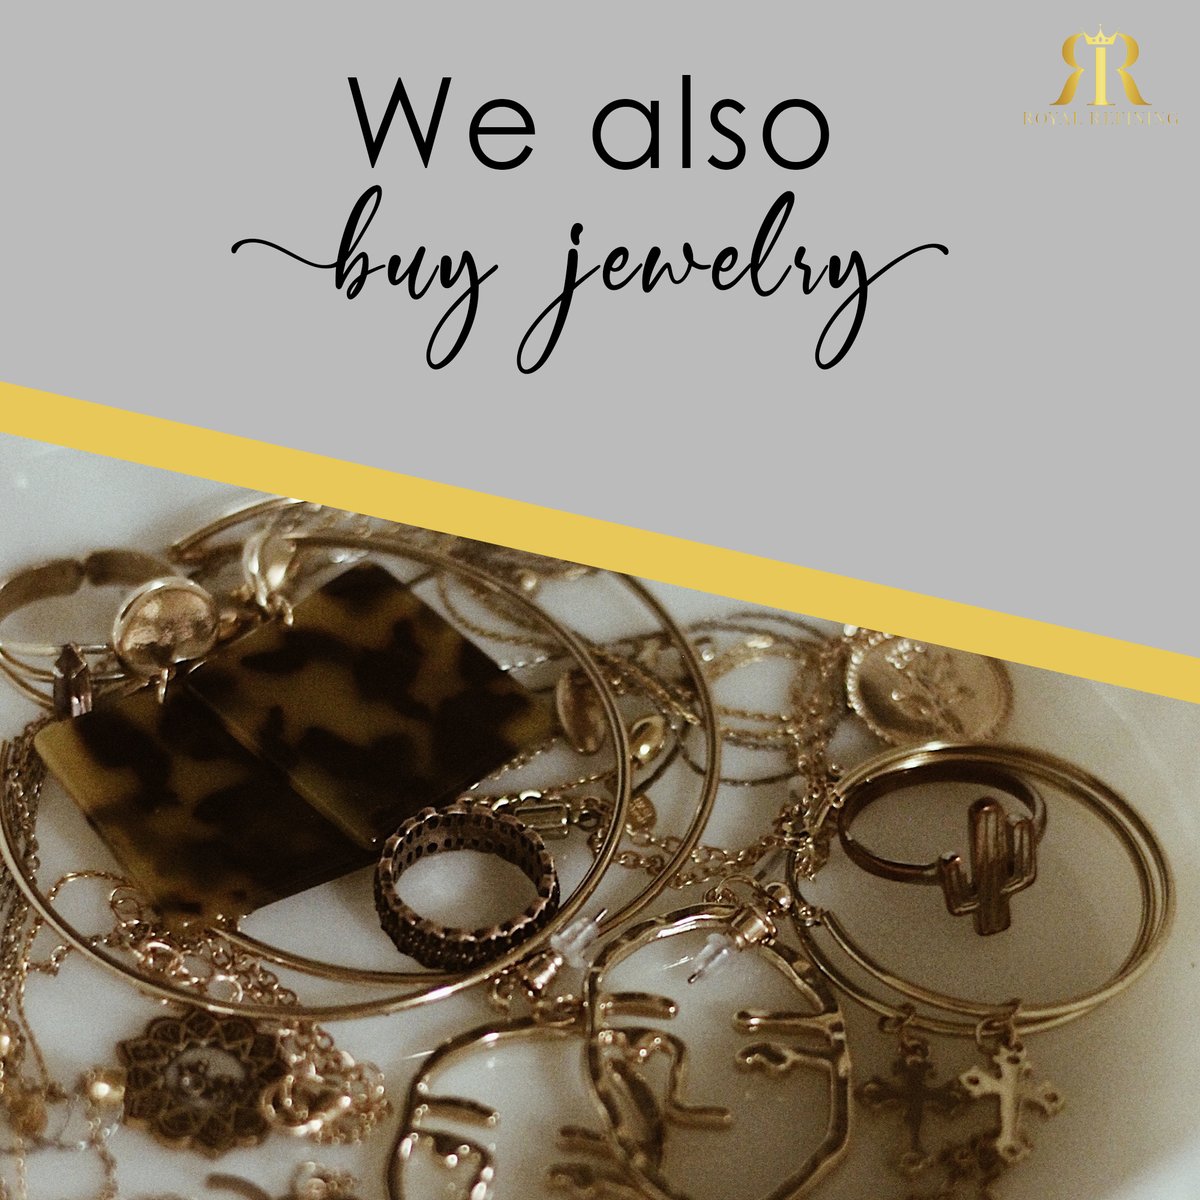 Got unwanted gold or silver jewelry that you don't wear anymore?

We will happily buy them from you!

Just reach out to us and let's discuss your FREE pick up today!

#dentalscrap #royalrefining #dentist #dentaloffice #dentalart #cashforgold #goldbuyer #dentalassistant